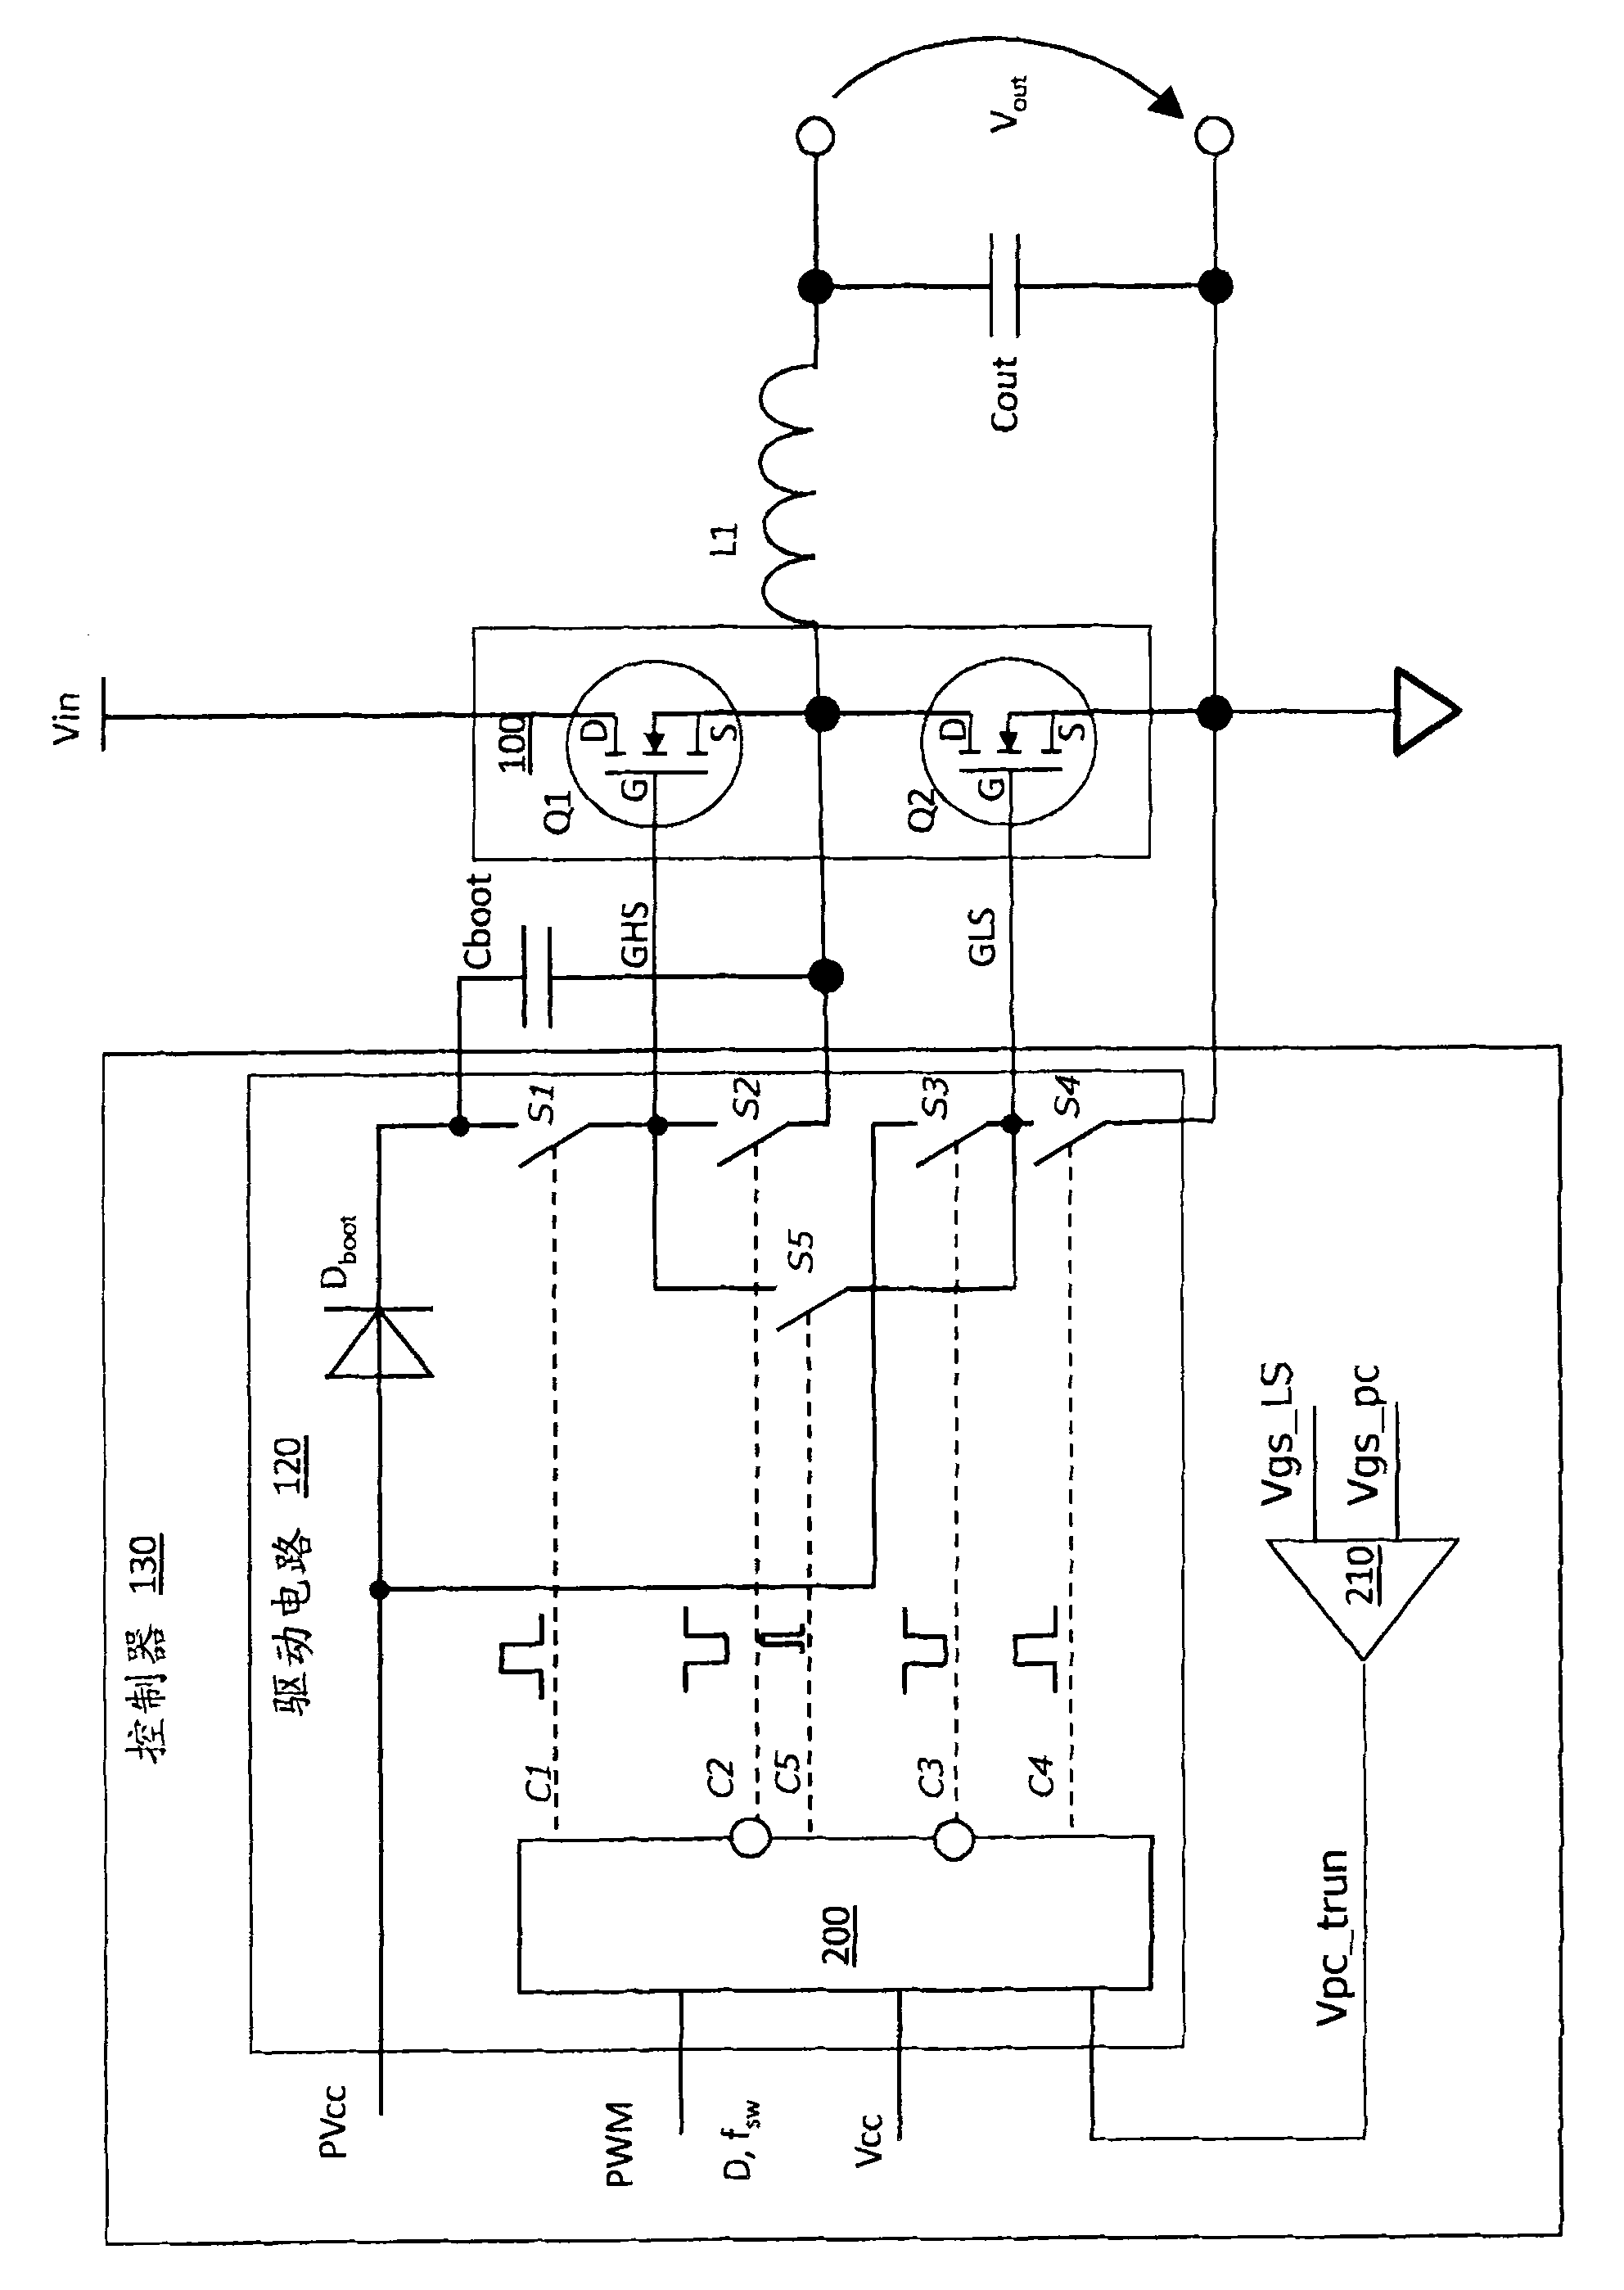 Charge recovery in power converter driver stages